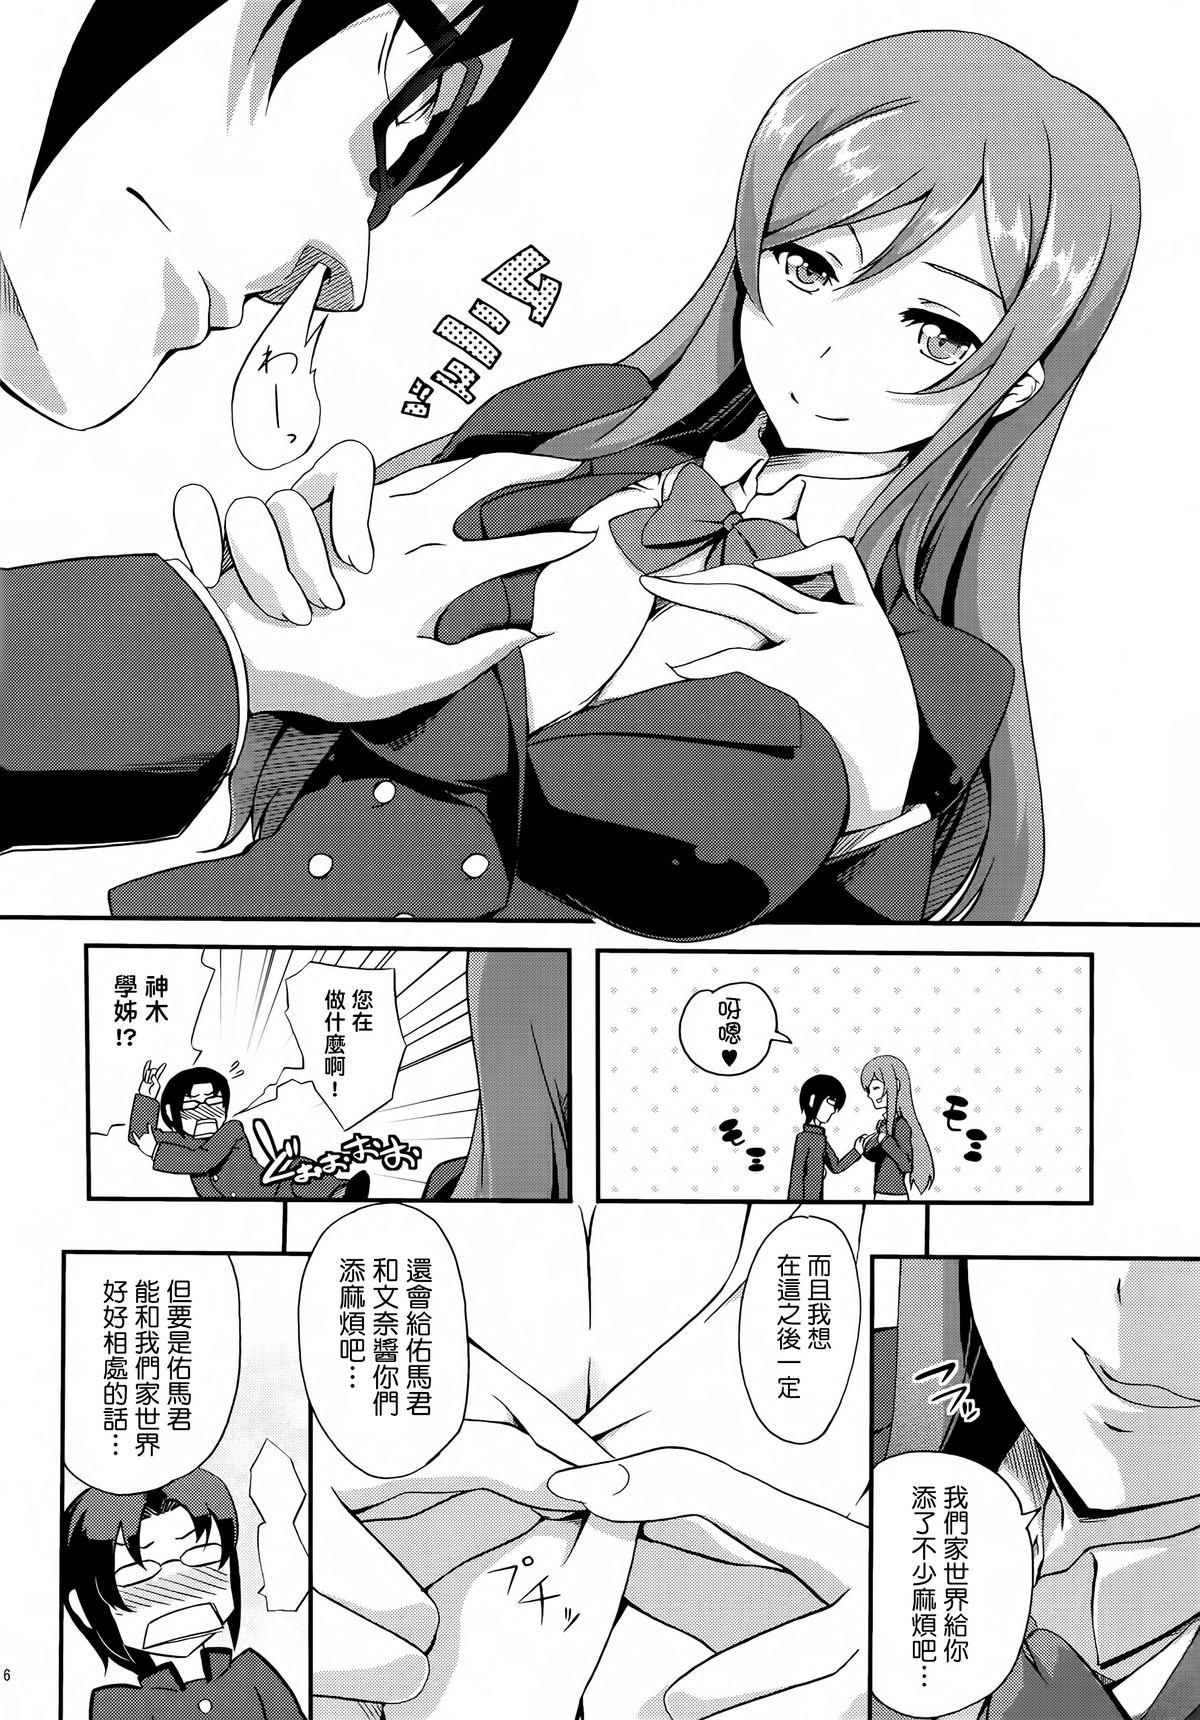 Large Mirai no Onegai - Gundam build fighters try Free Petite Porn - Page 6